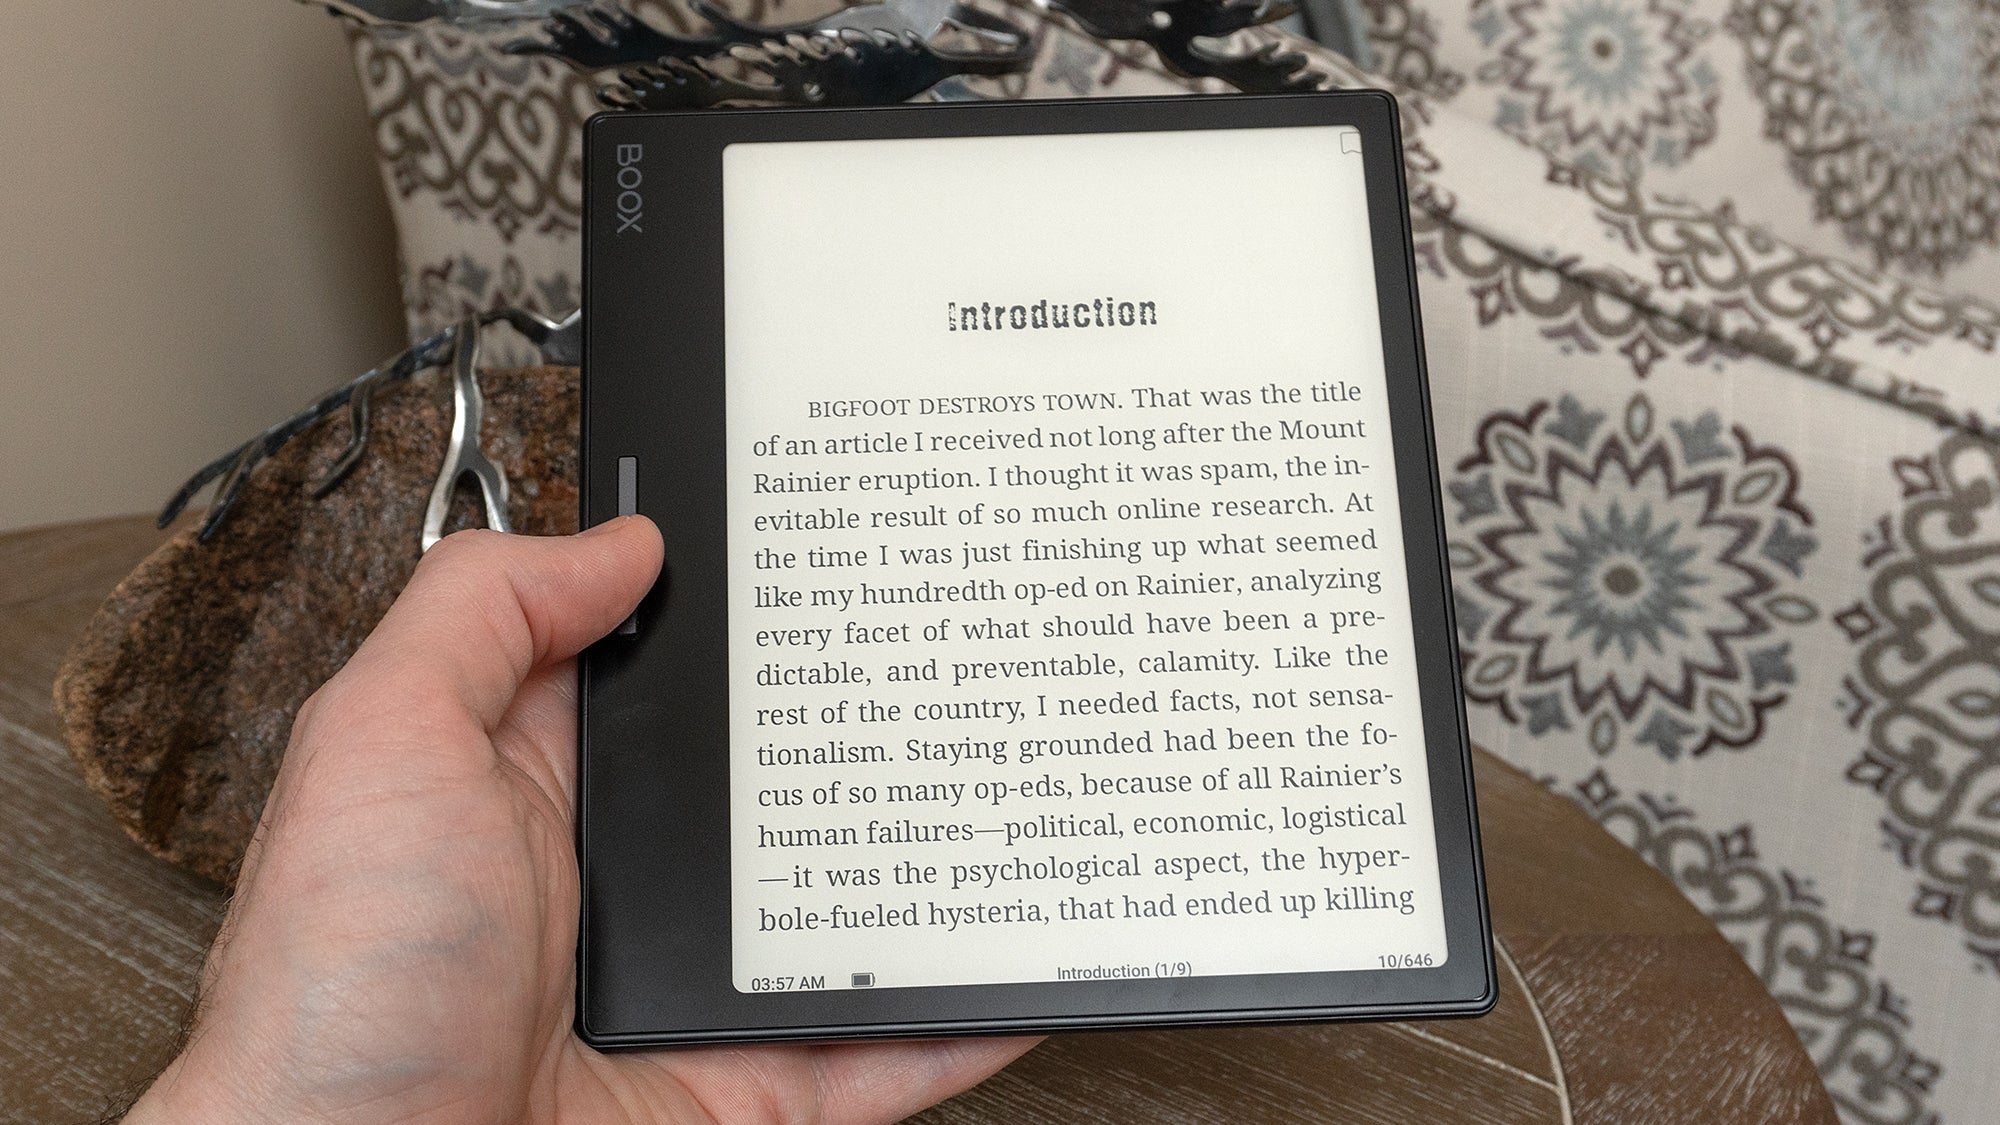 The Onyx Boox Leaf 2 is one of the smallest e-readers available today with dedicated page turn buttons. (Photo: Andrew Liszewski | Gizmodo)